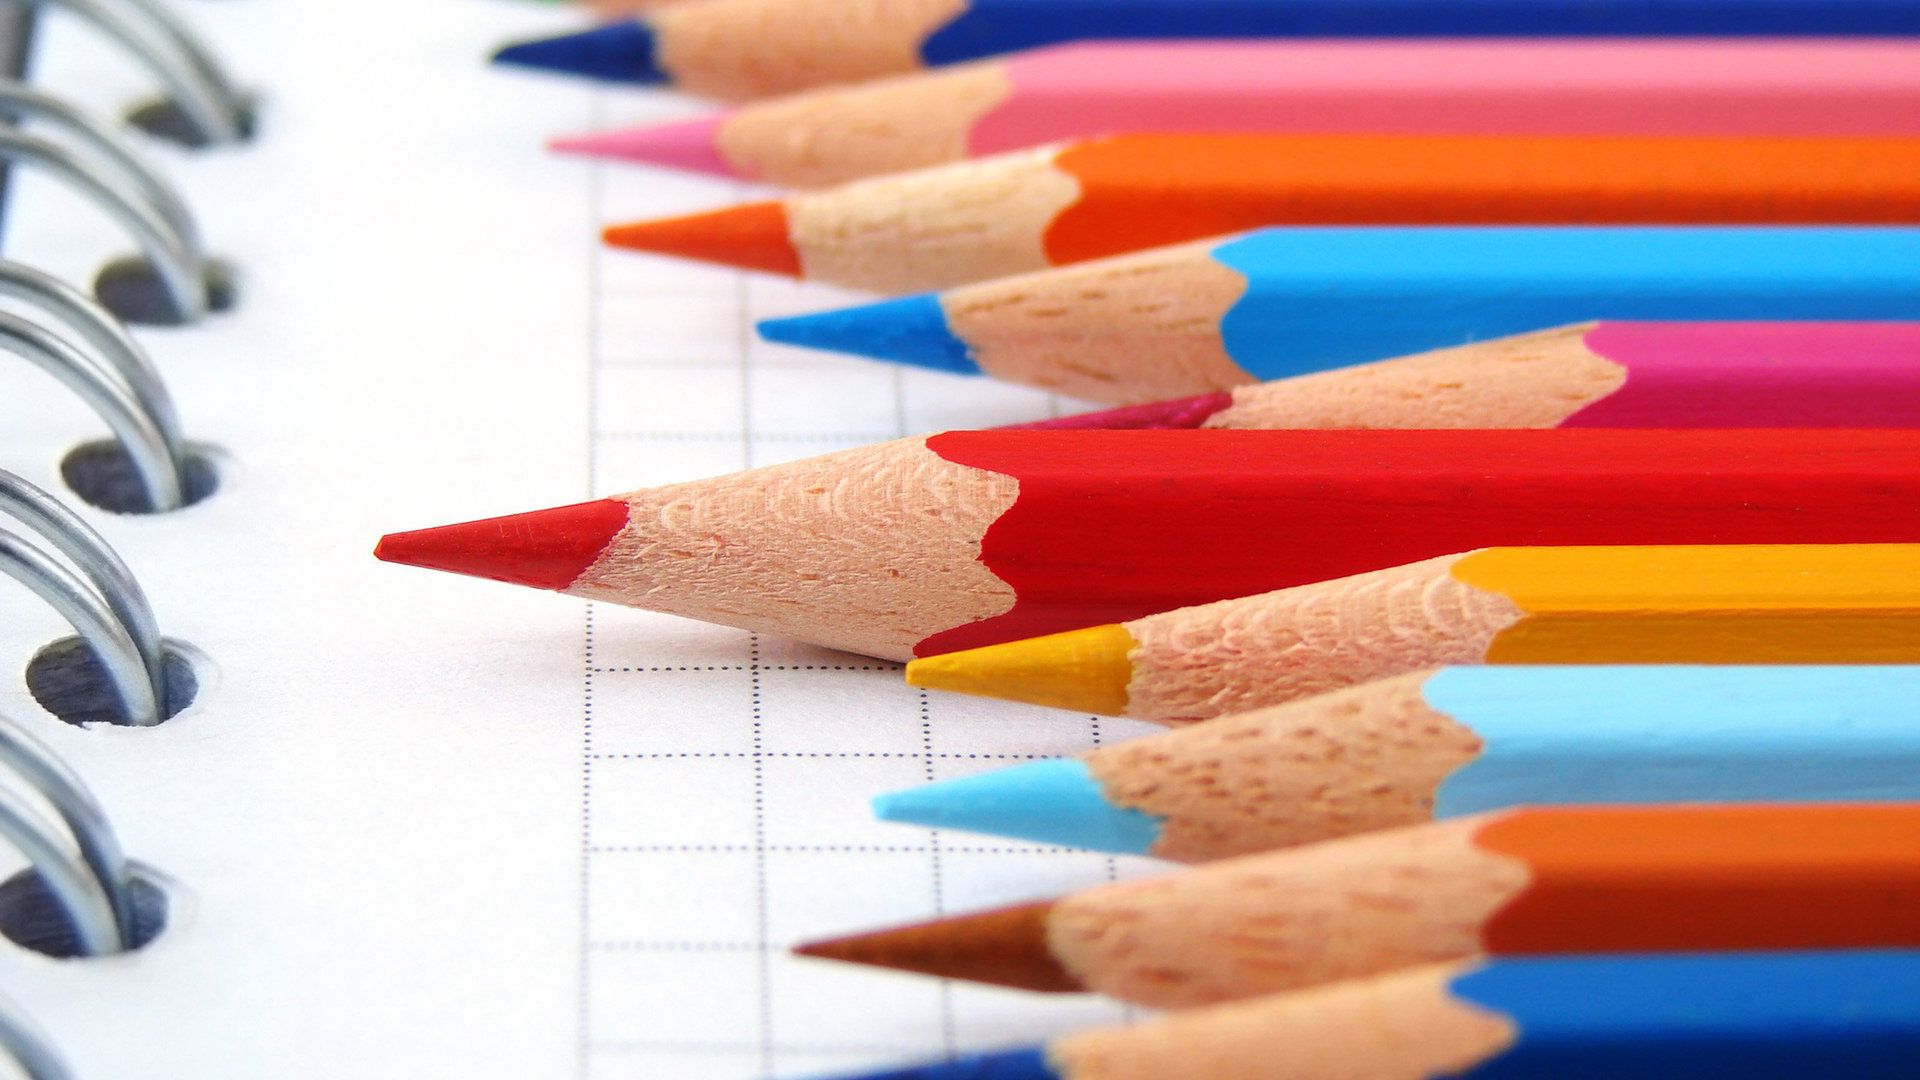 Pencils HD Wallpapers, Pencils Images Free | Cool Wallpapers